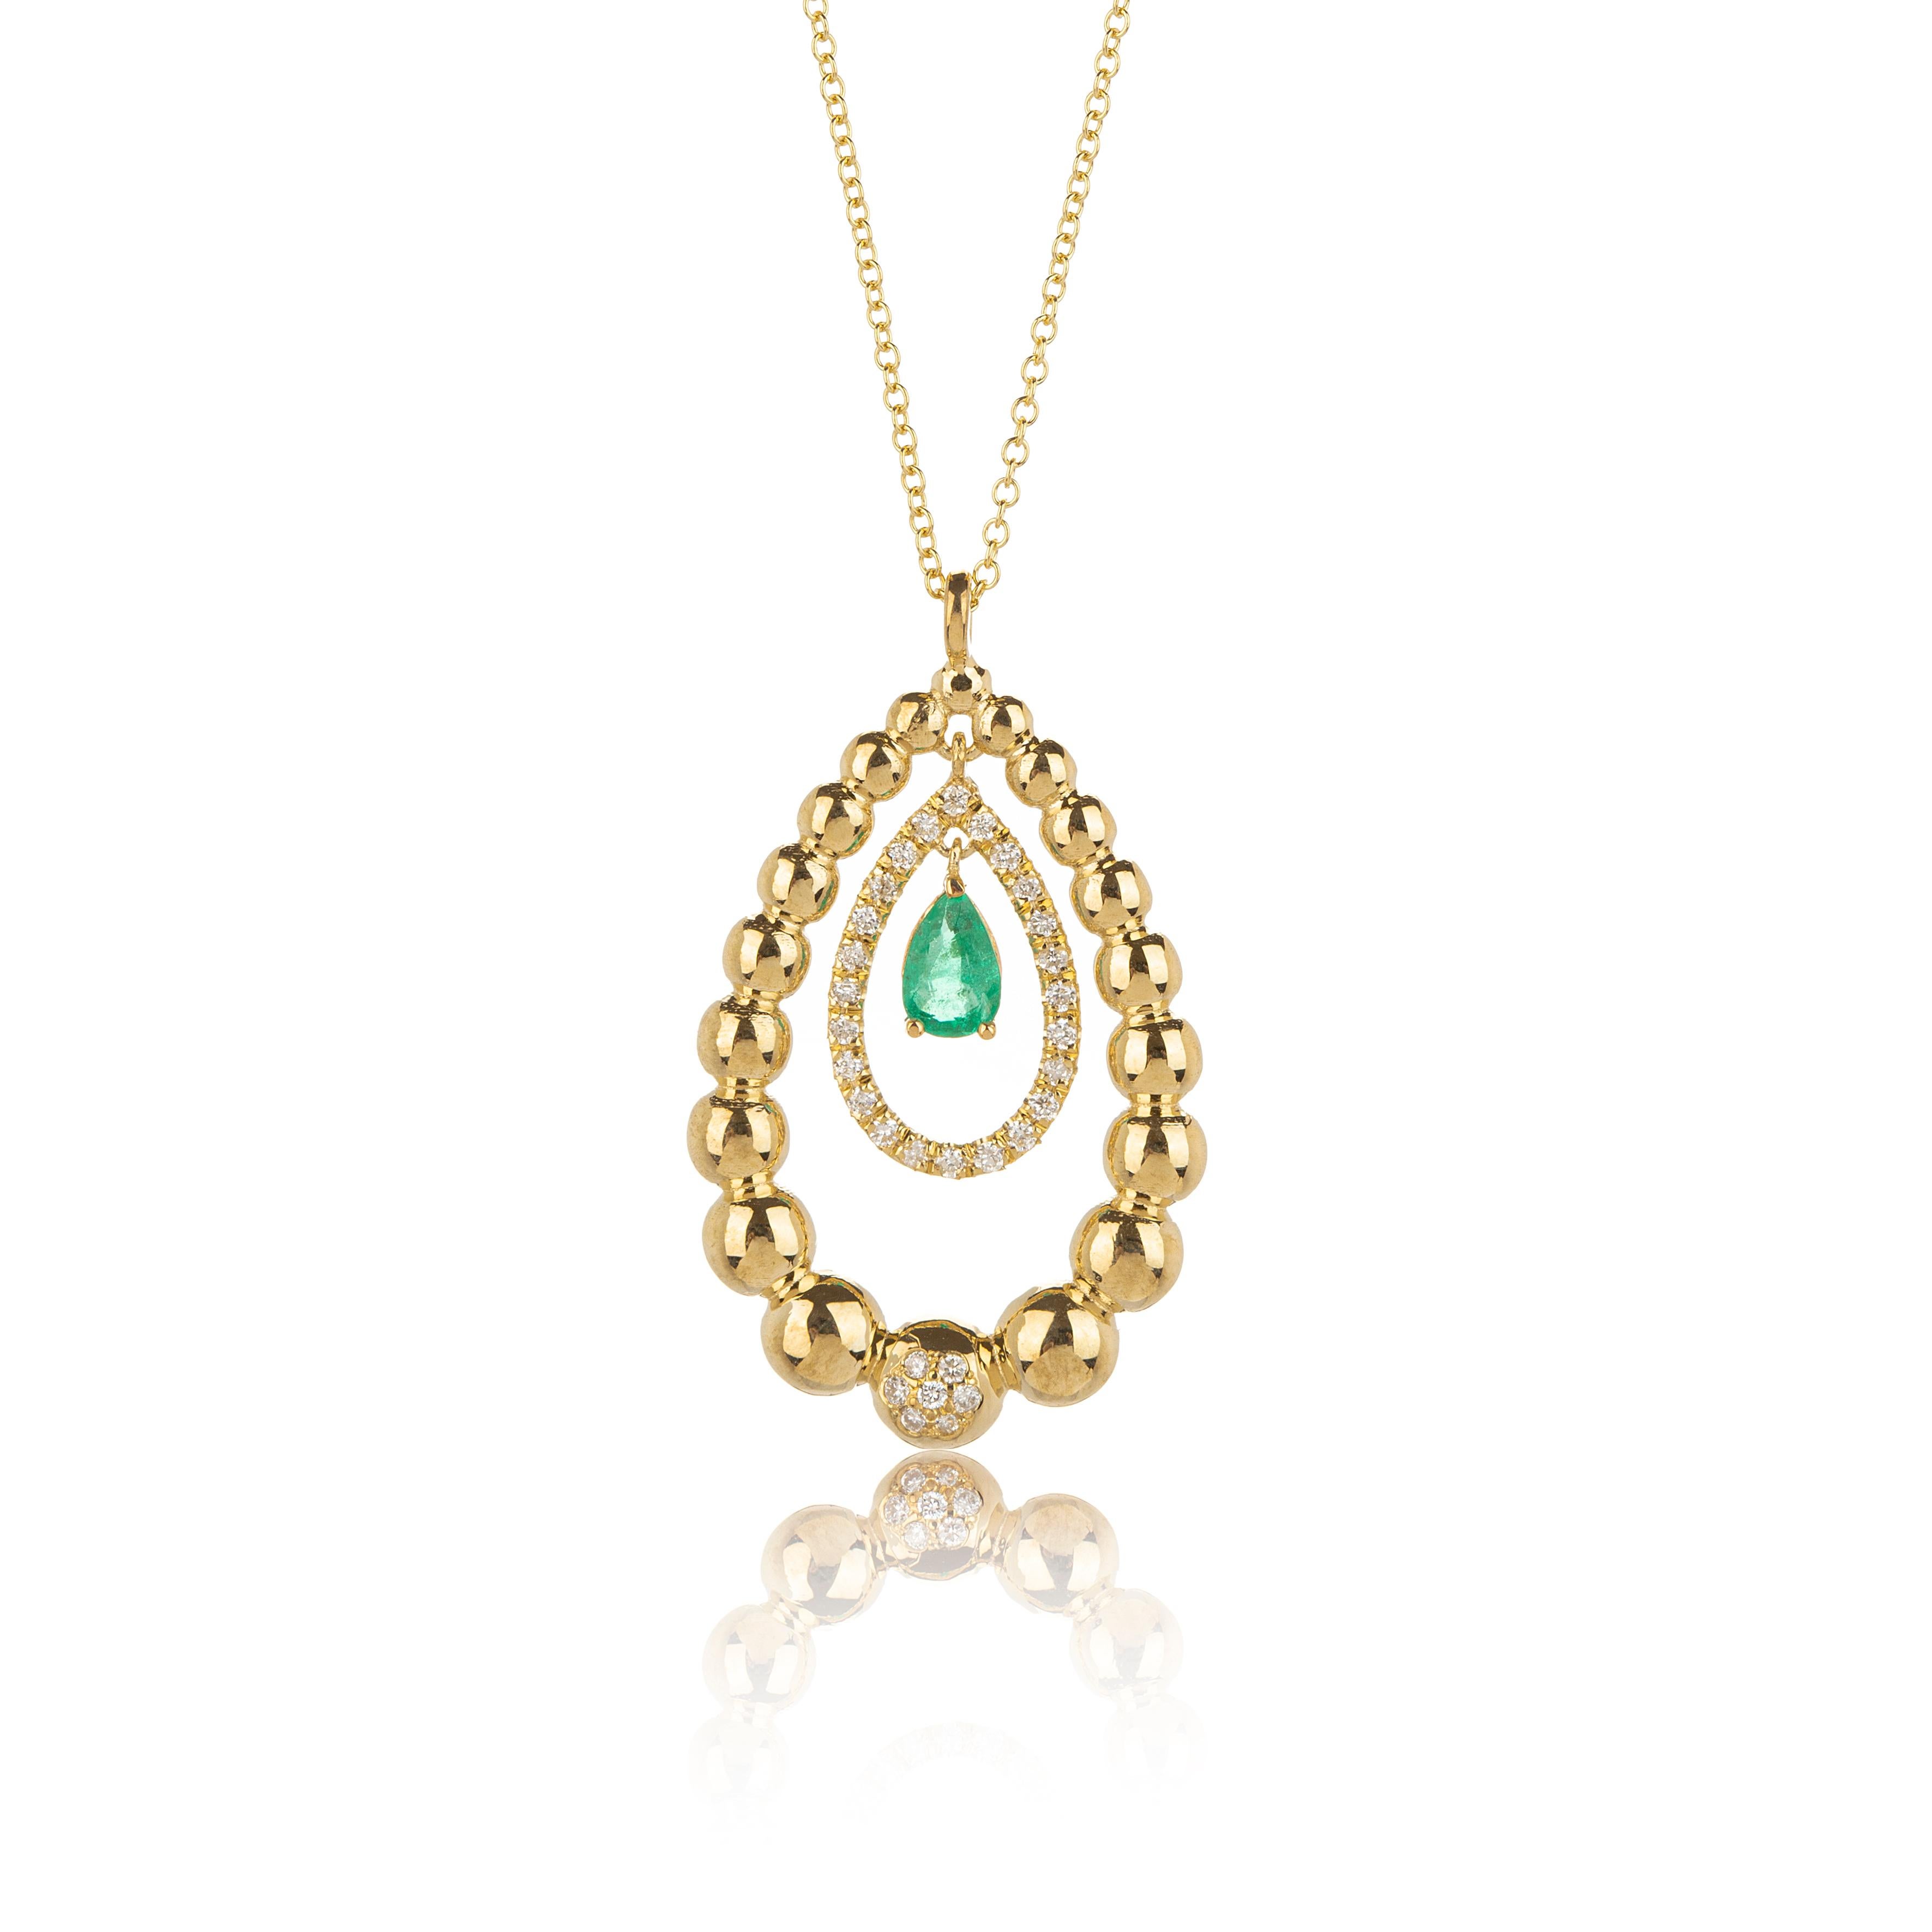 Emerald Pear Cut and Pear  Shape Necklace in 18Kt Gold with Diamonds. The necklace is graduated in three different levels. The emerald stone in the center of the necklace, has a nice and sweet delicate movement and the pear cut makes it even more